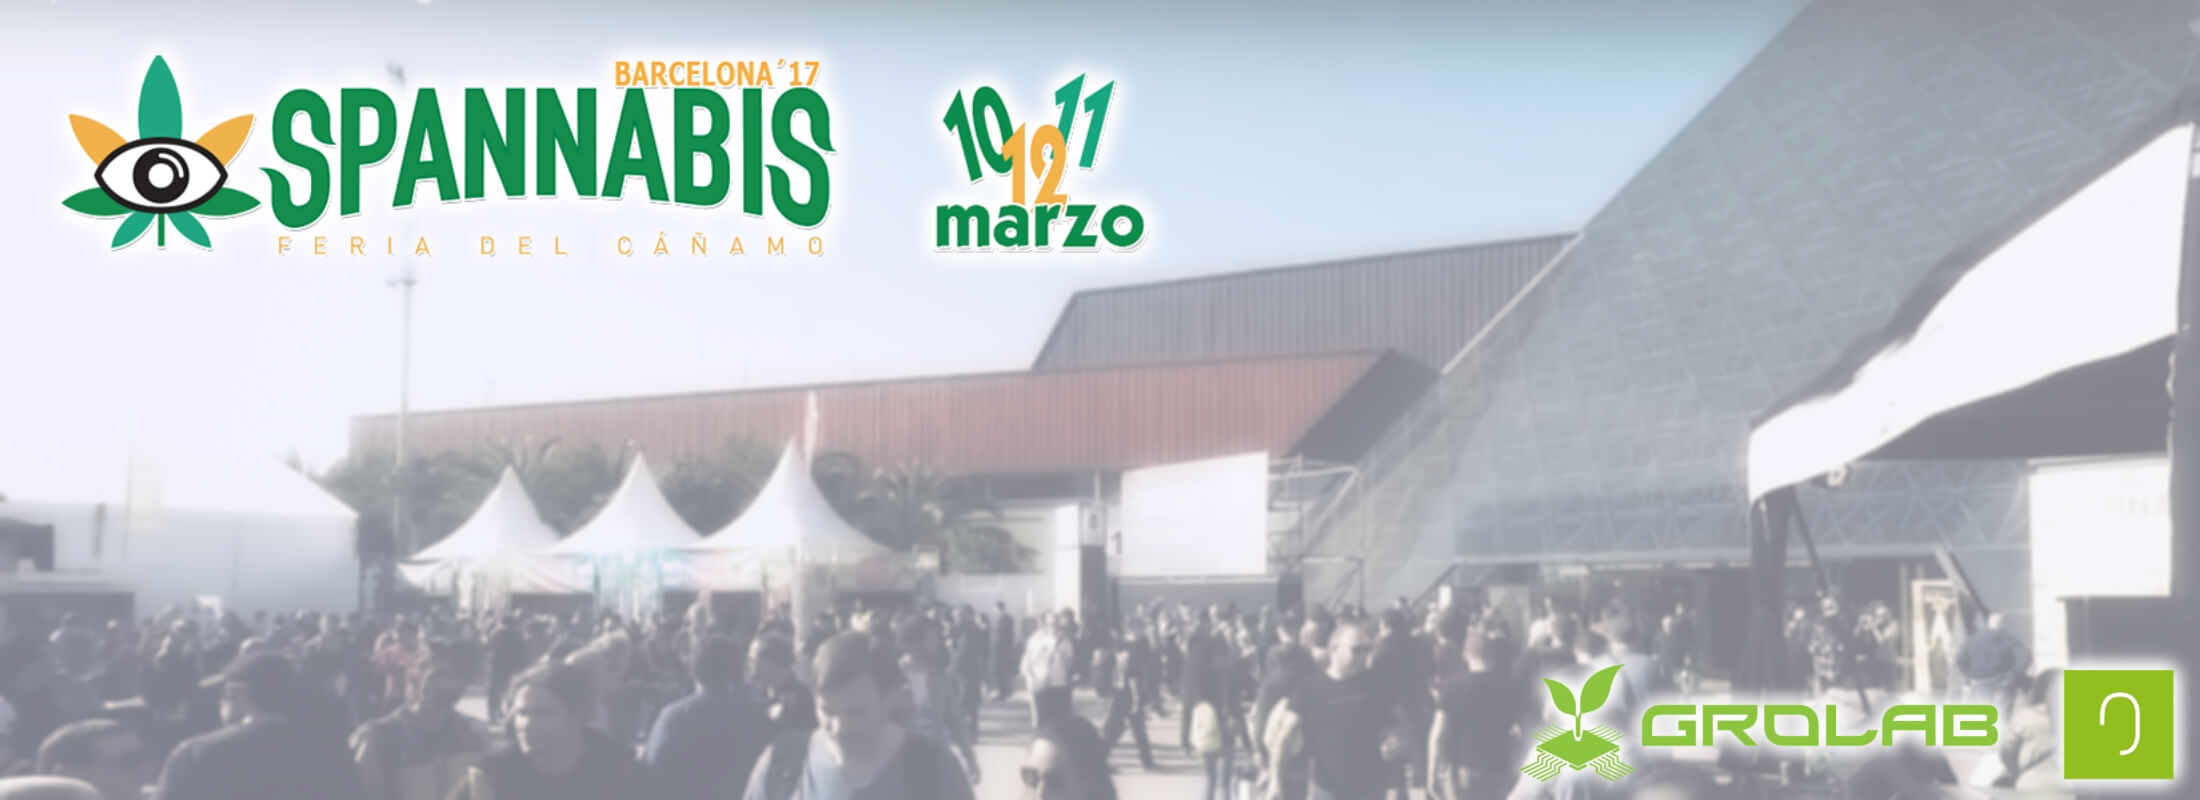 Spannabis Barcelona 2017 outside view, with Spannabis logo on top-left corner, Open Grow™ and GroLab™ logos on bottom-right corner